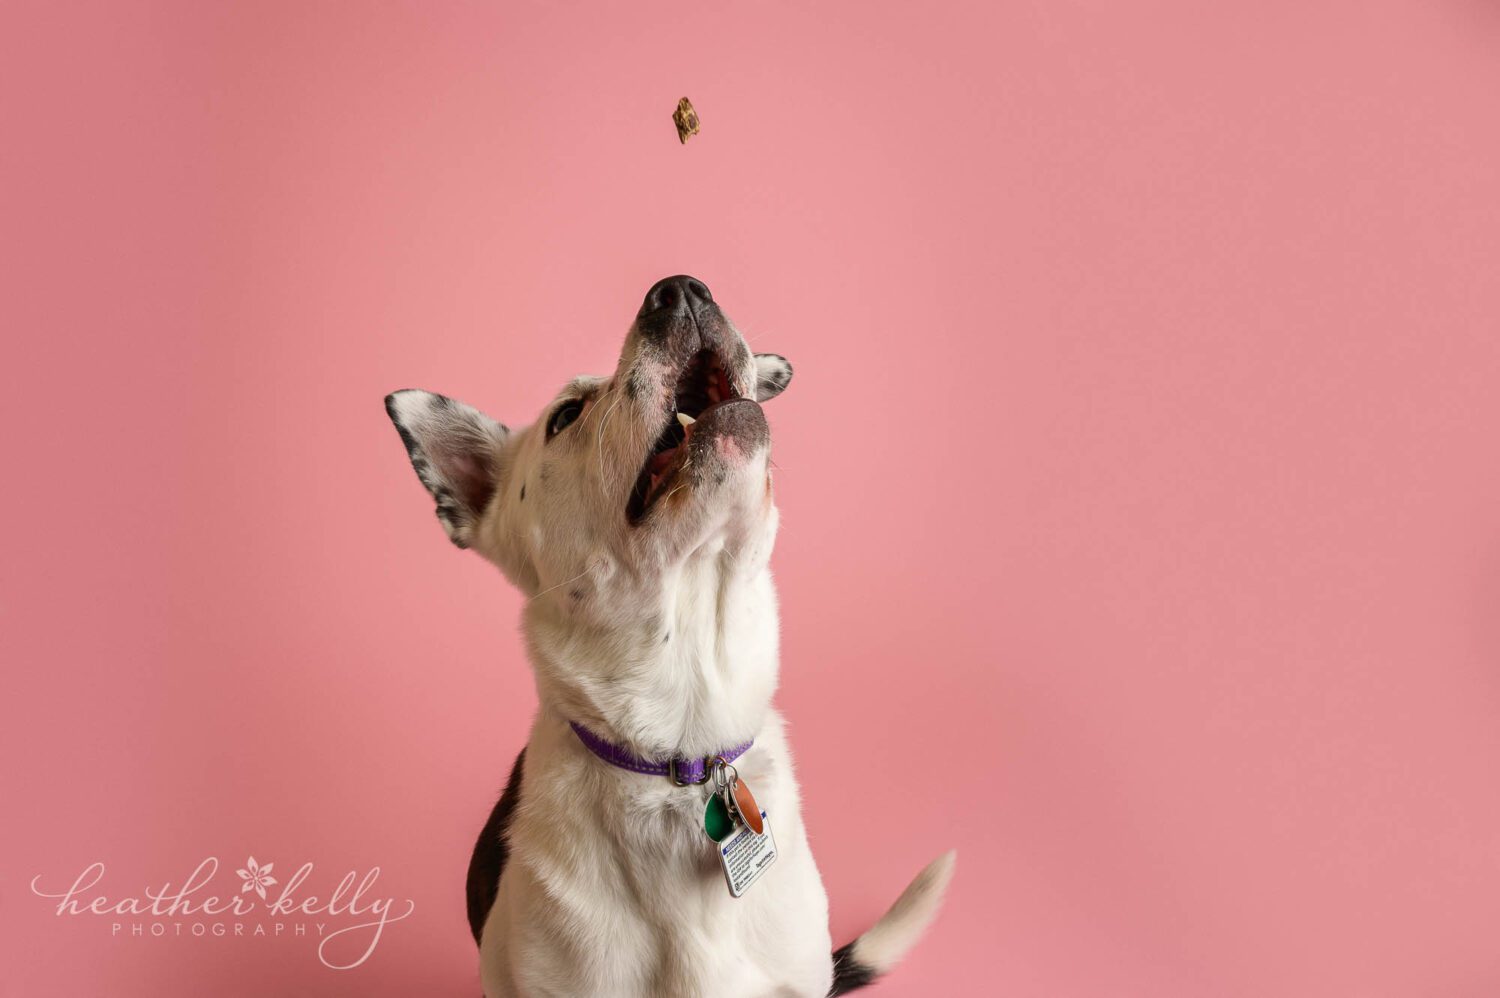 a dog tries to catch a treat in the air. There is a pink background 